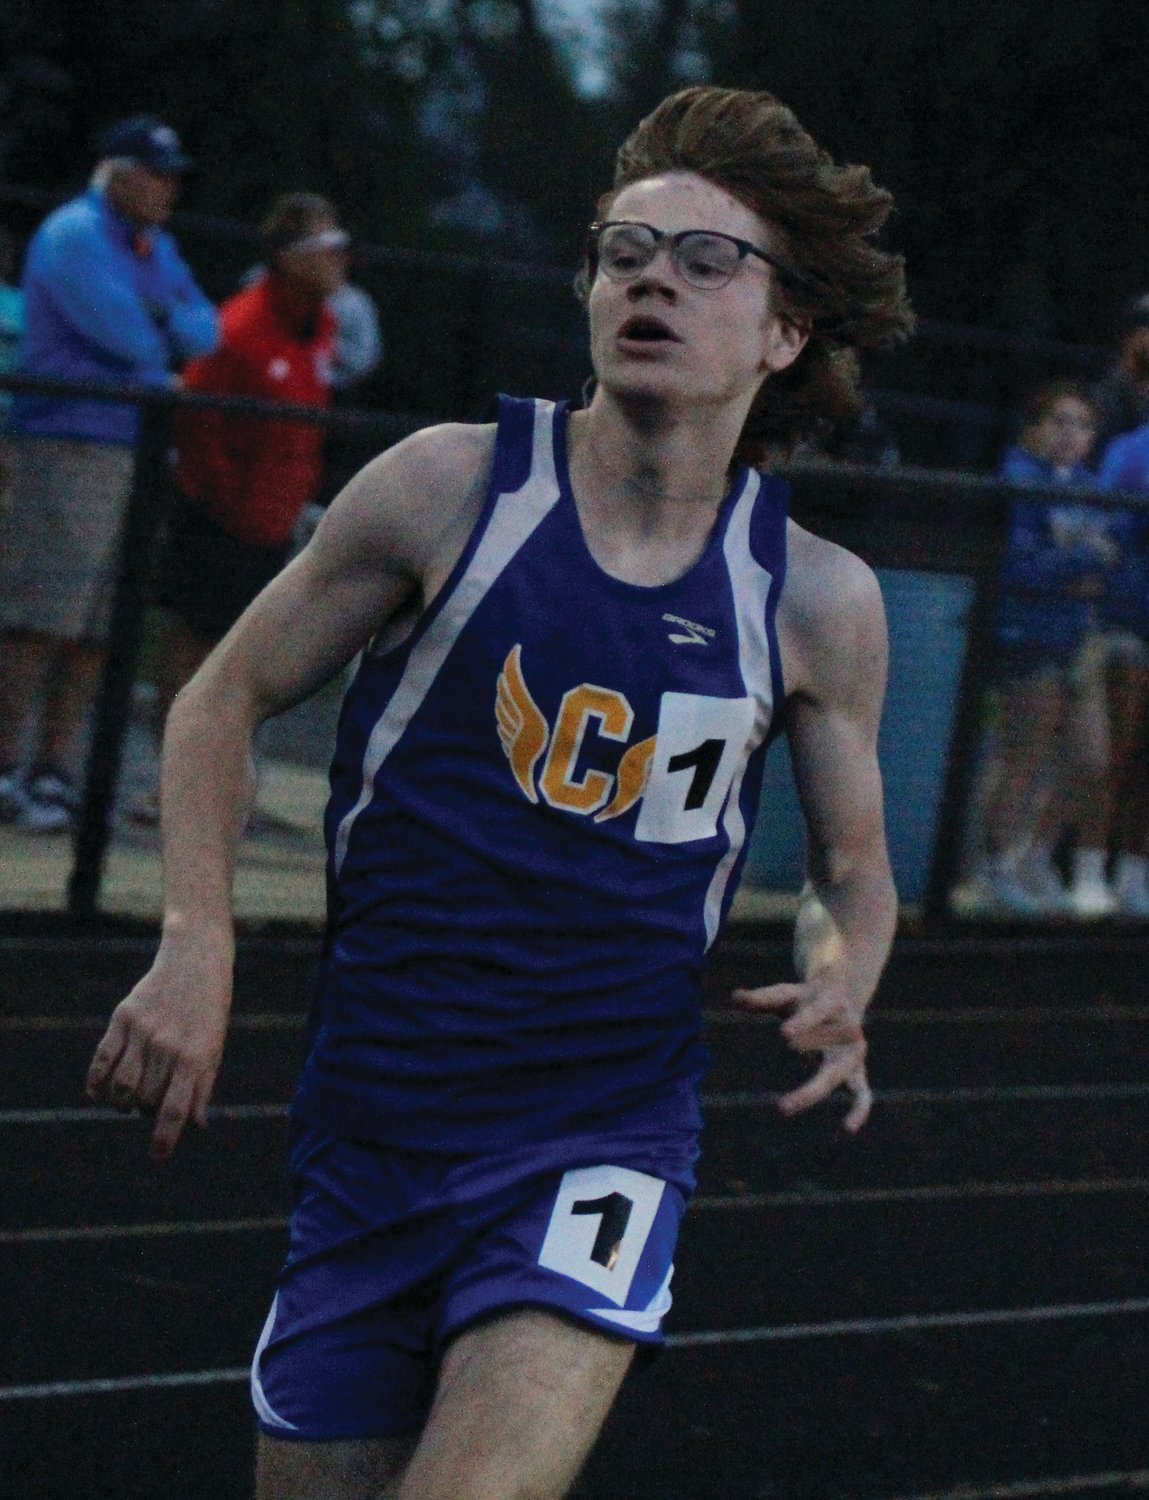 Crawfordsville's Hunter Hutchison raced to a win in the boys' 800 meter run.